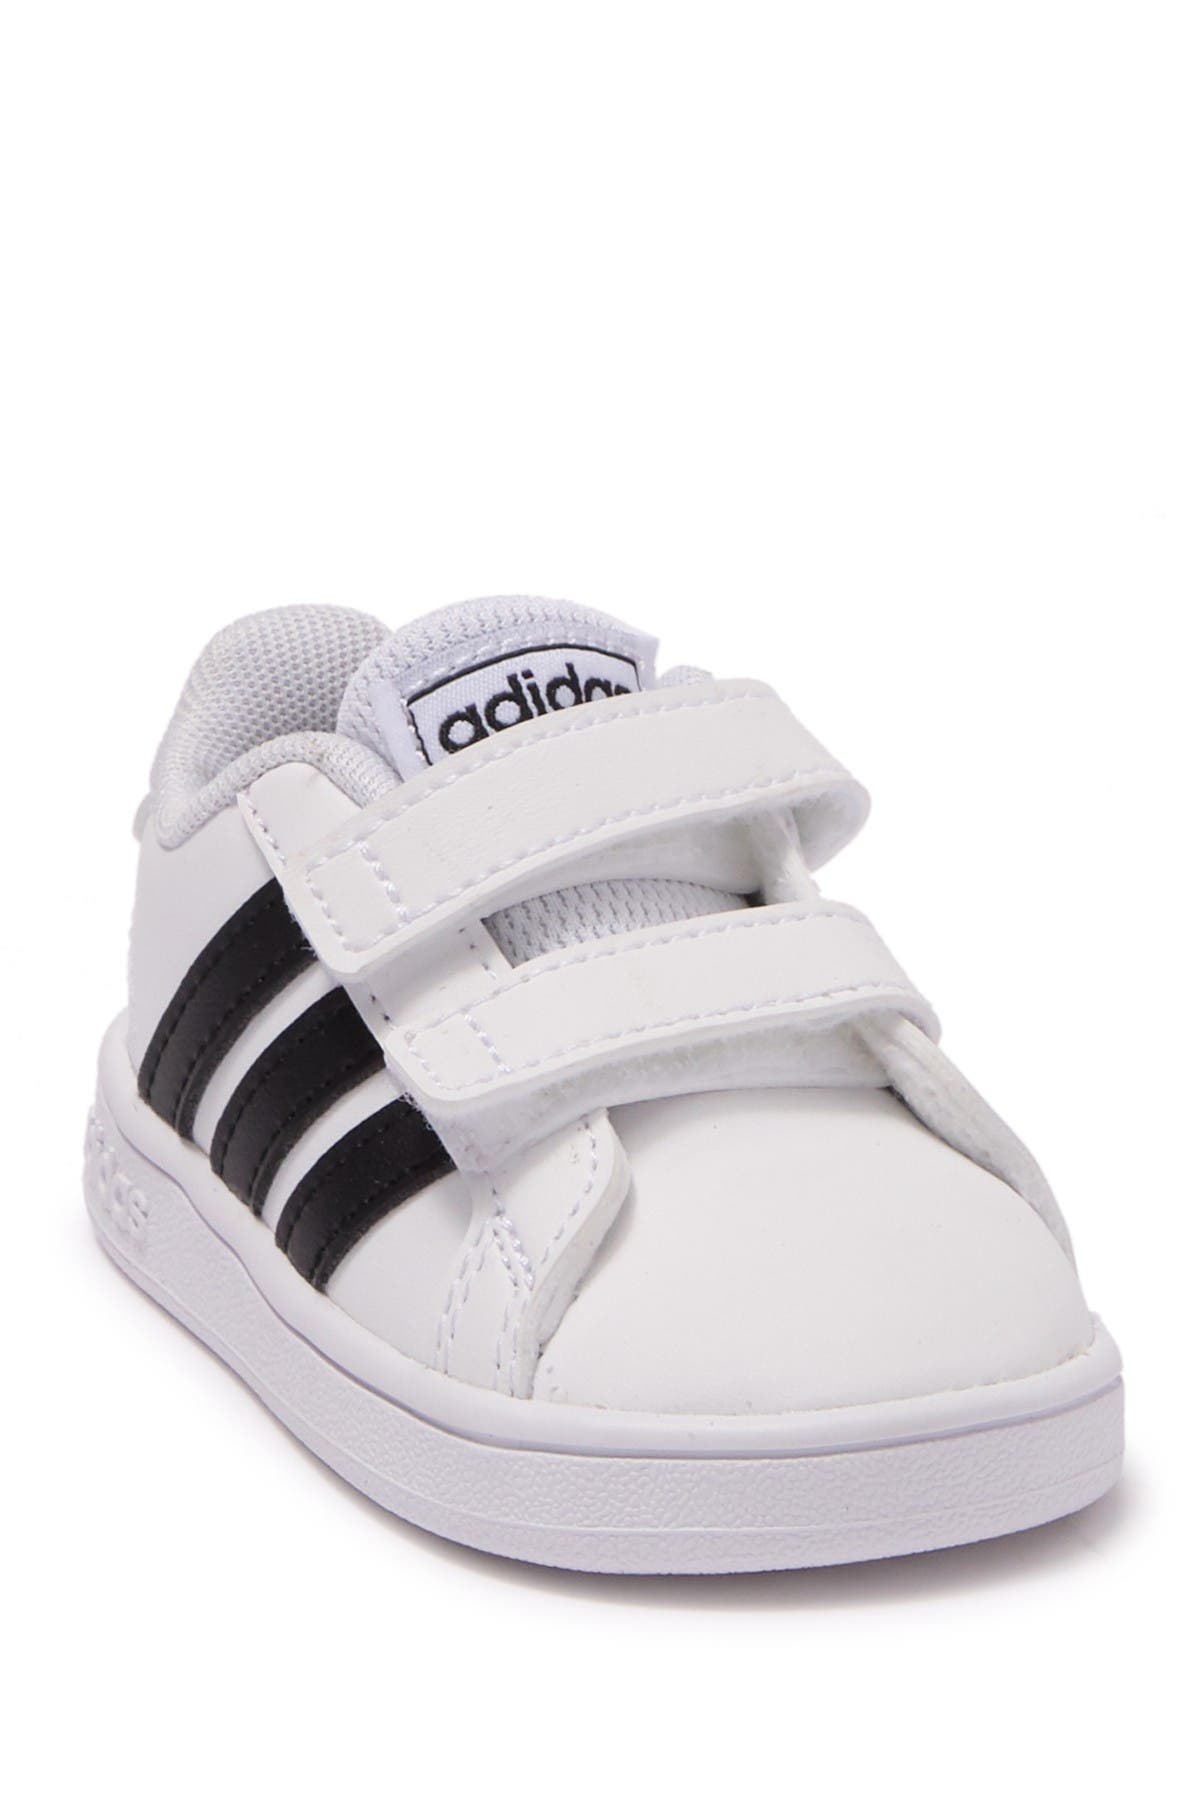 adidas toddler outfit